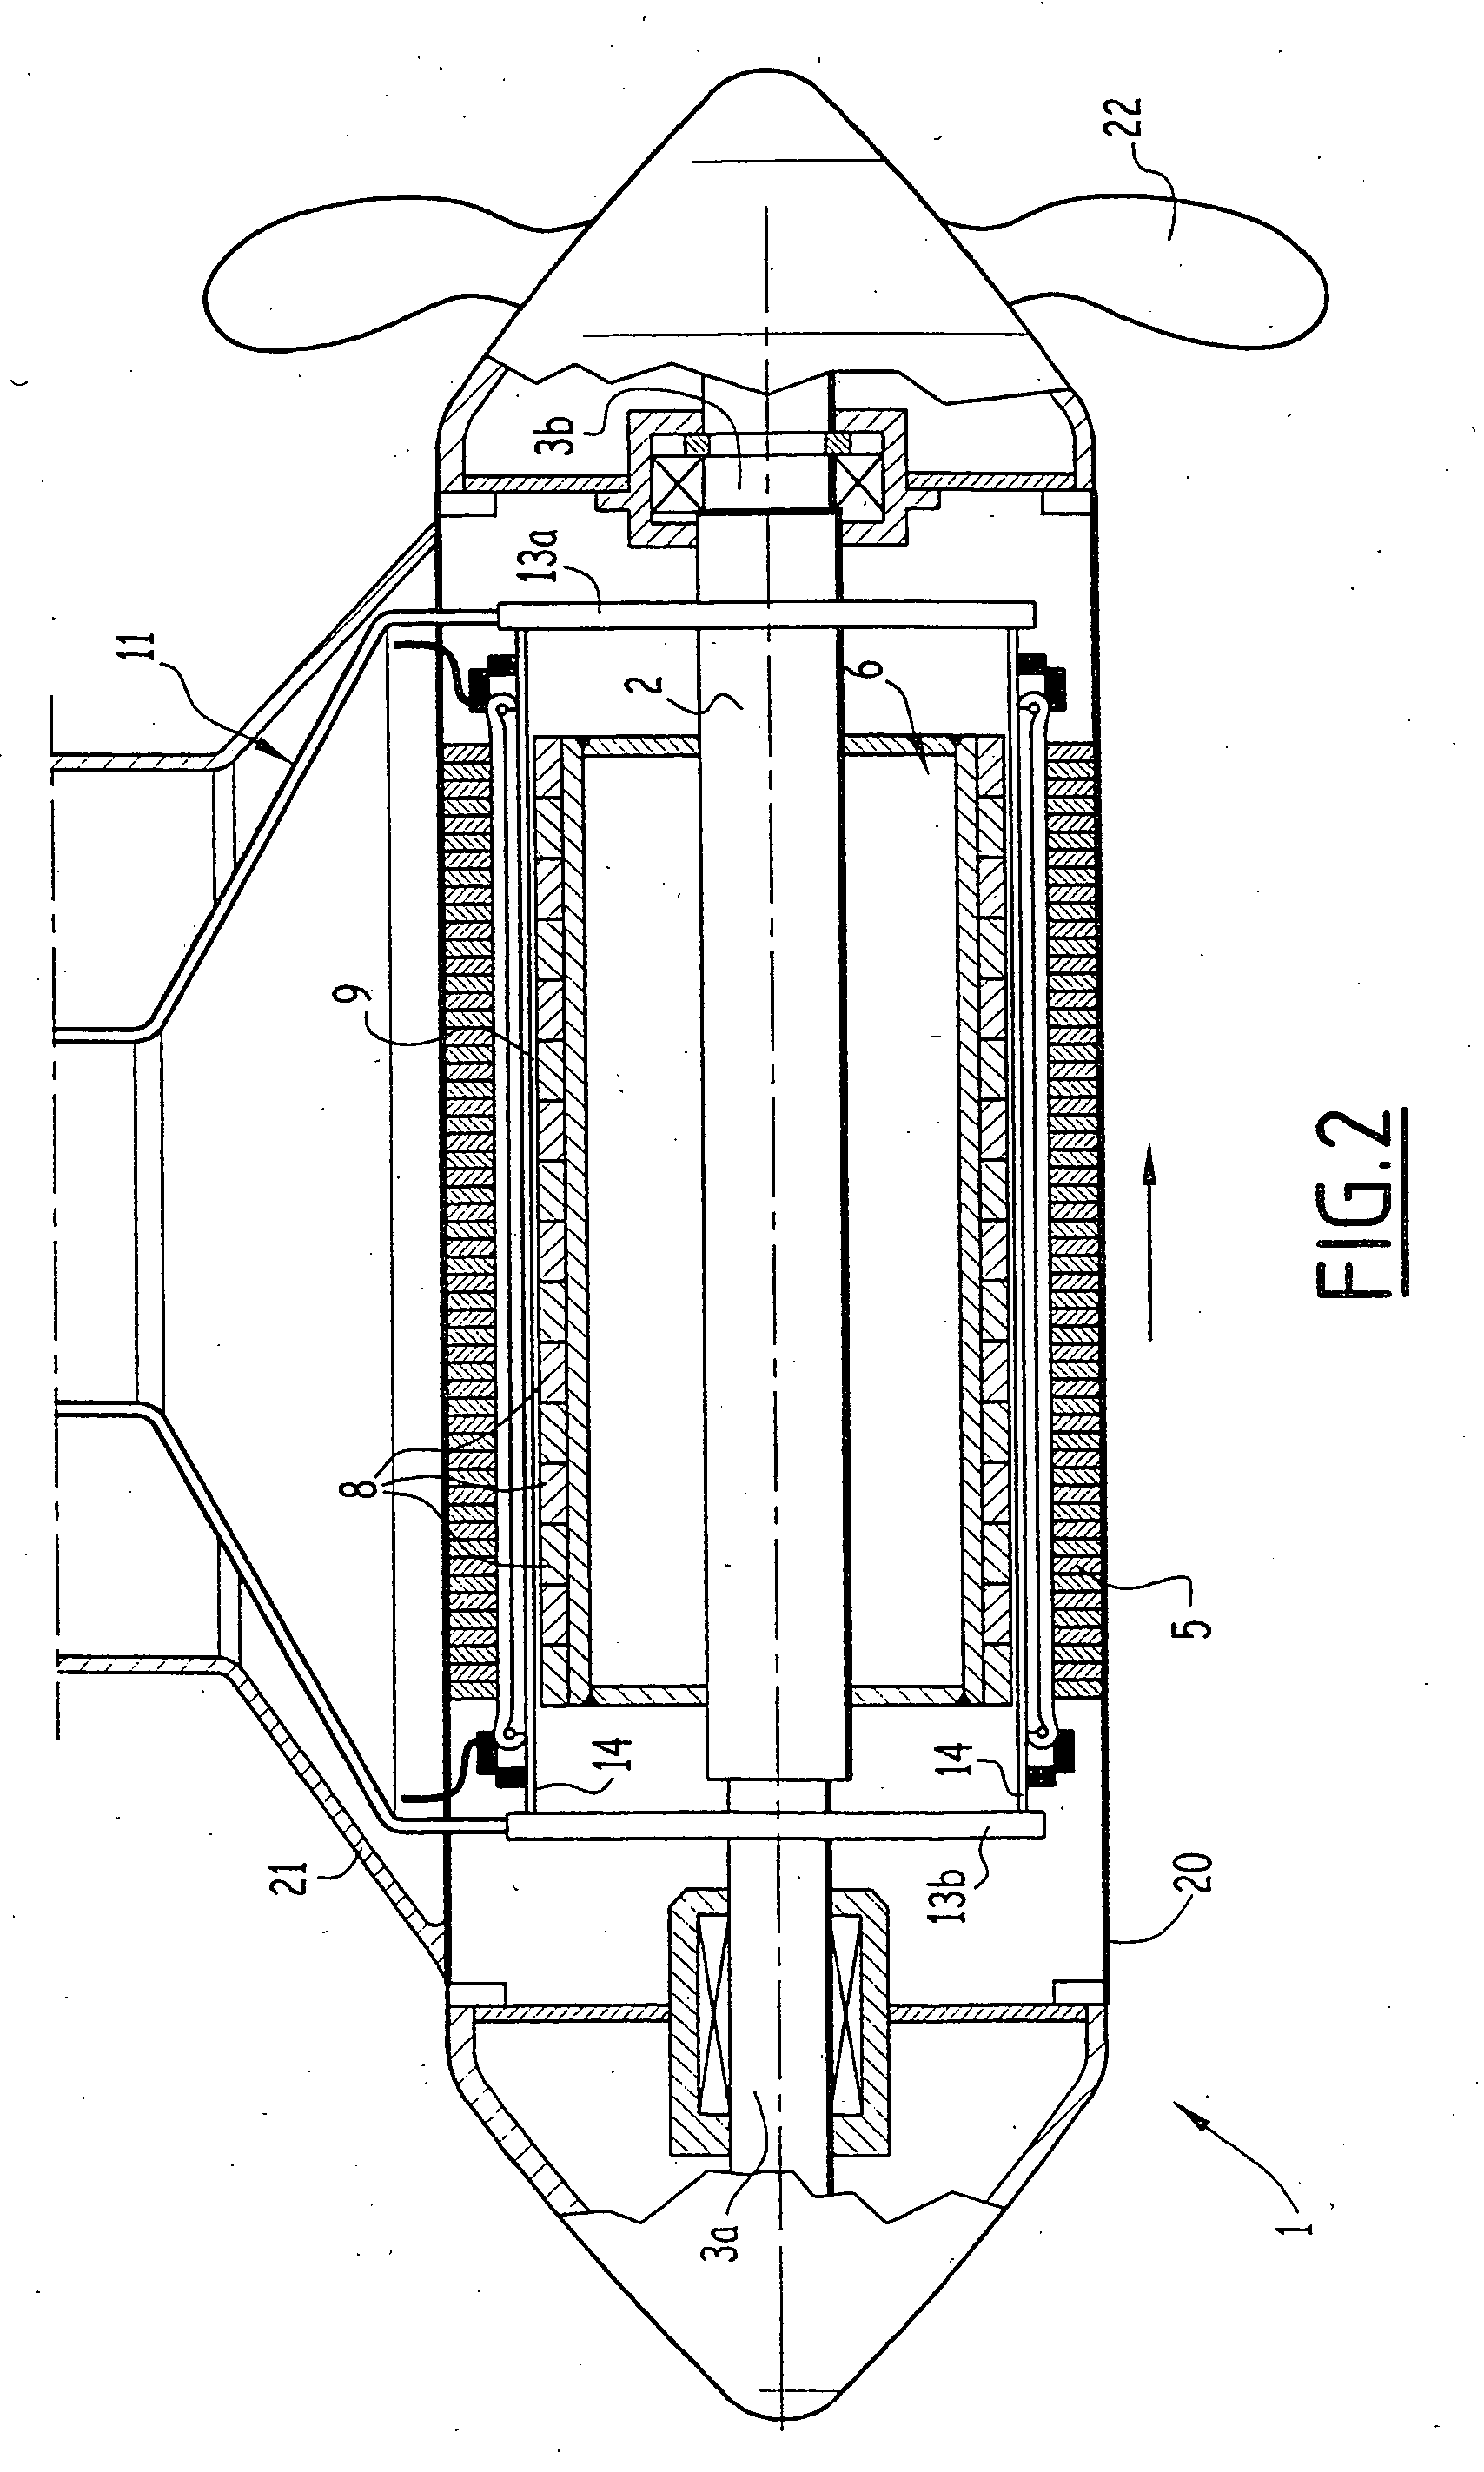 Device for cooling and electrical machine, in particular a synchronous electrical machine having permanent magnets